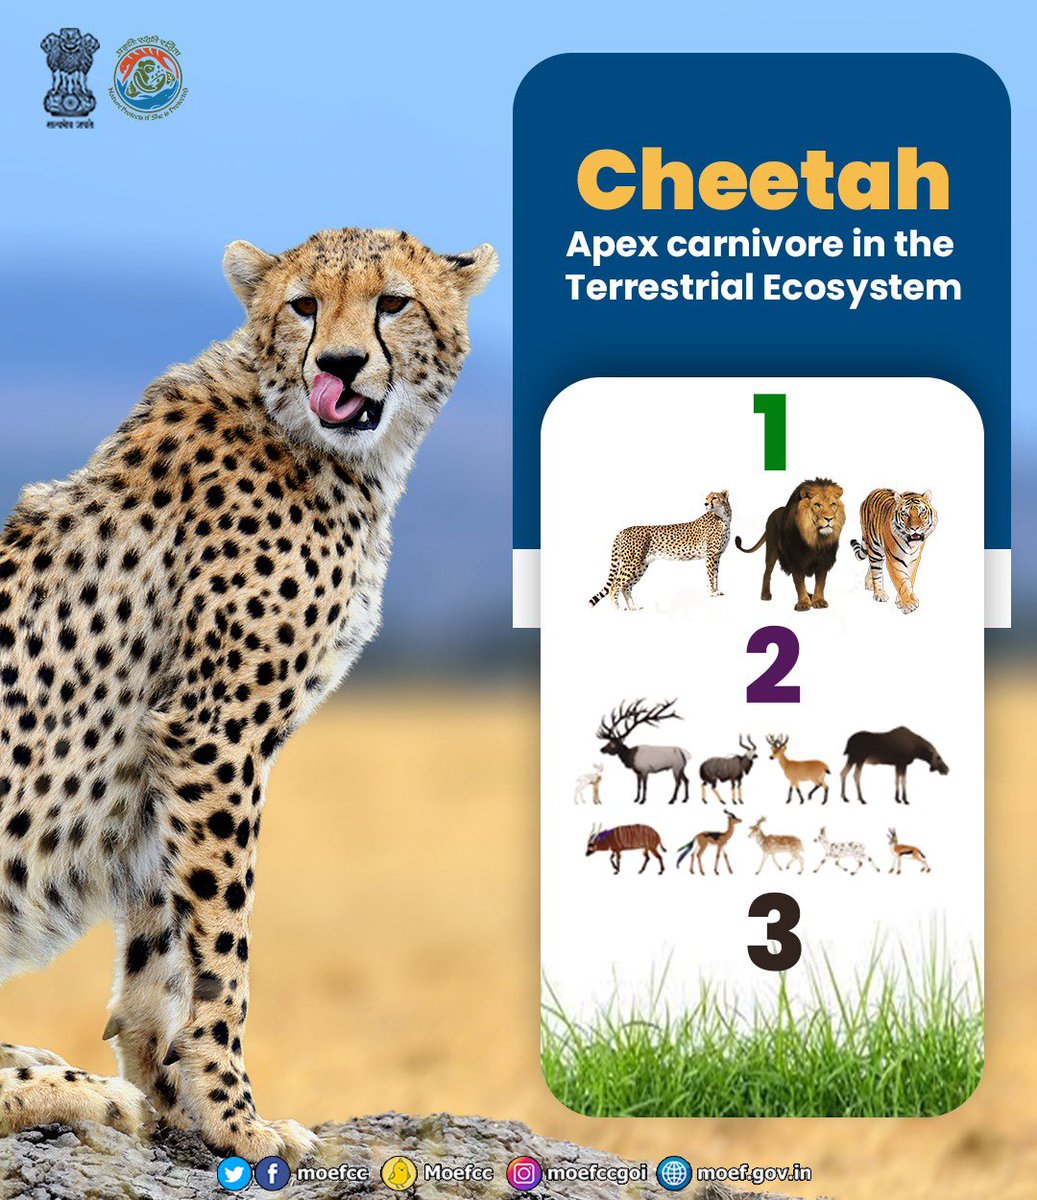 Here is your chance to contribute in the landmark ‘Cheetah Reintroduction Project’! Suggest us a name for the project and win a chance to see Cheetahs in Kuno National Park. Visit : mygov.in/cheetahnames/?…